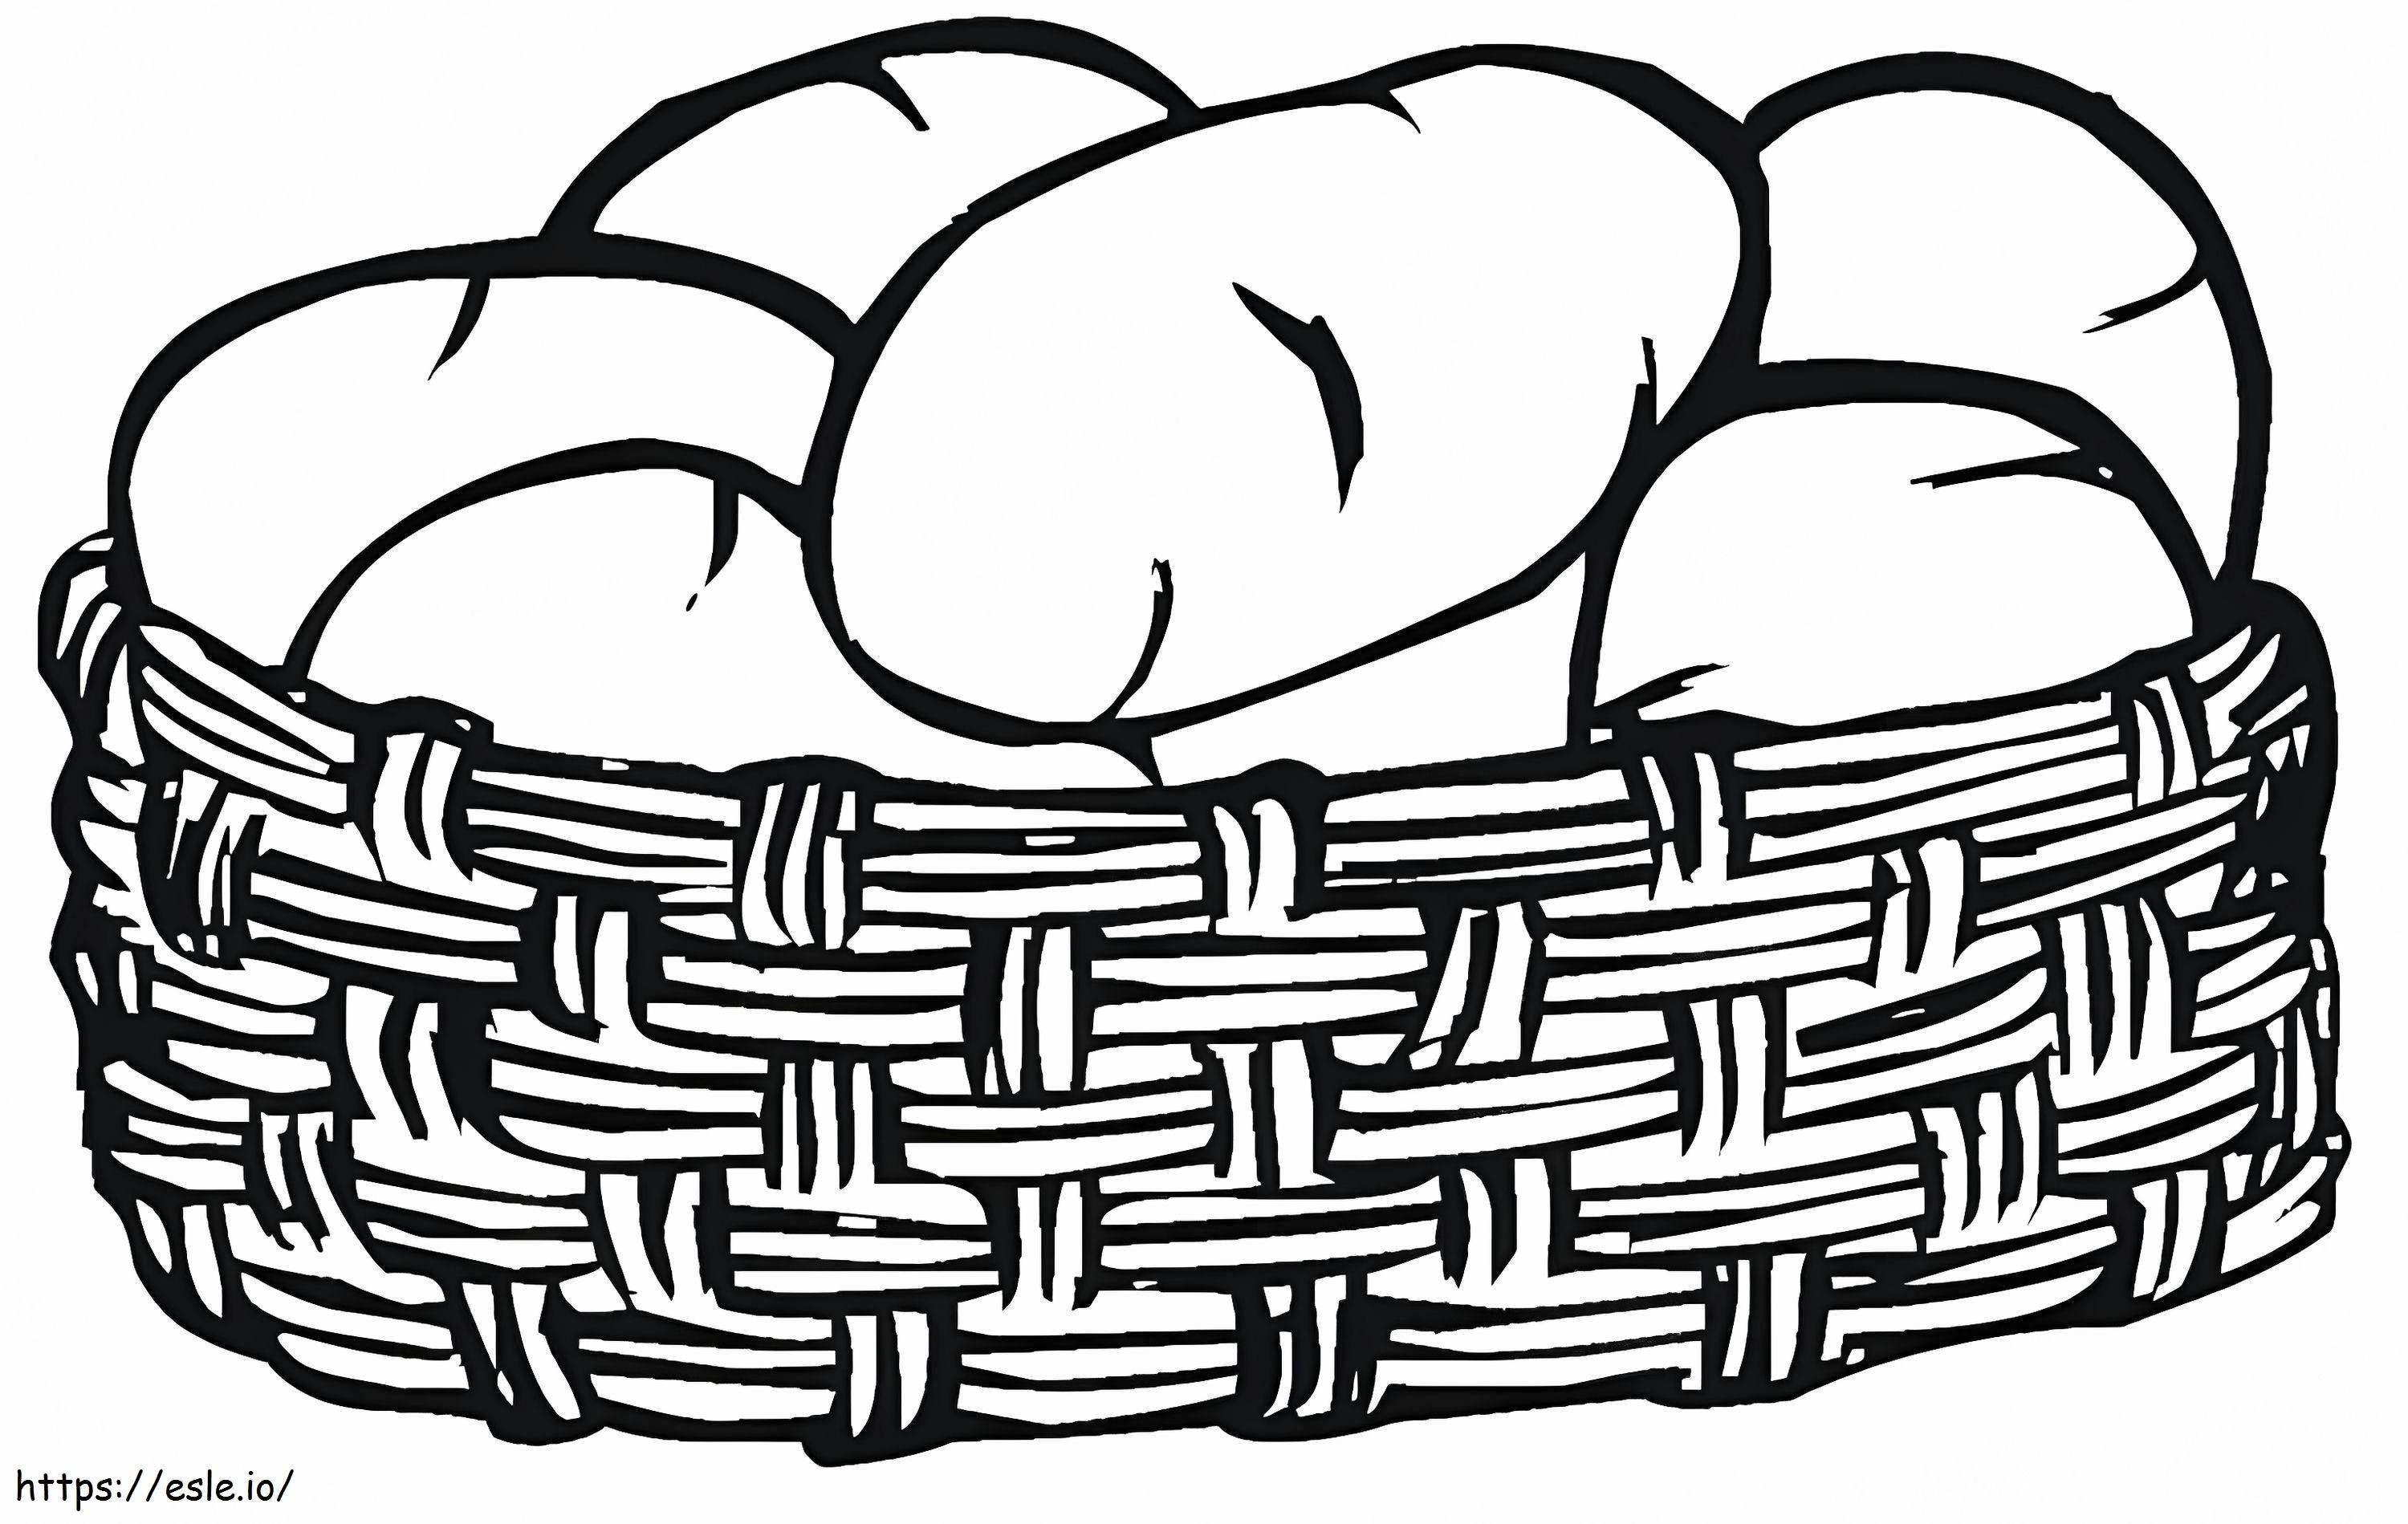 A Basket Tomatoes A4 coloring page